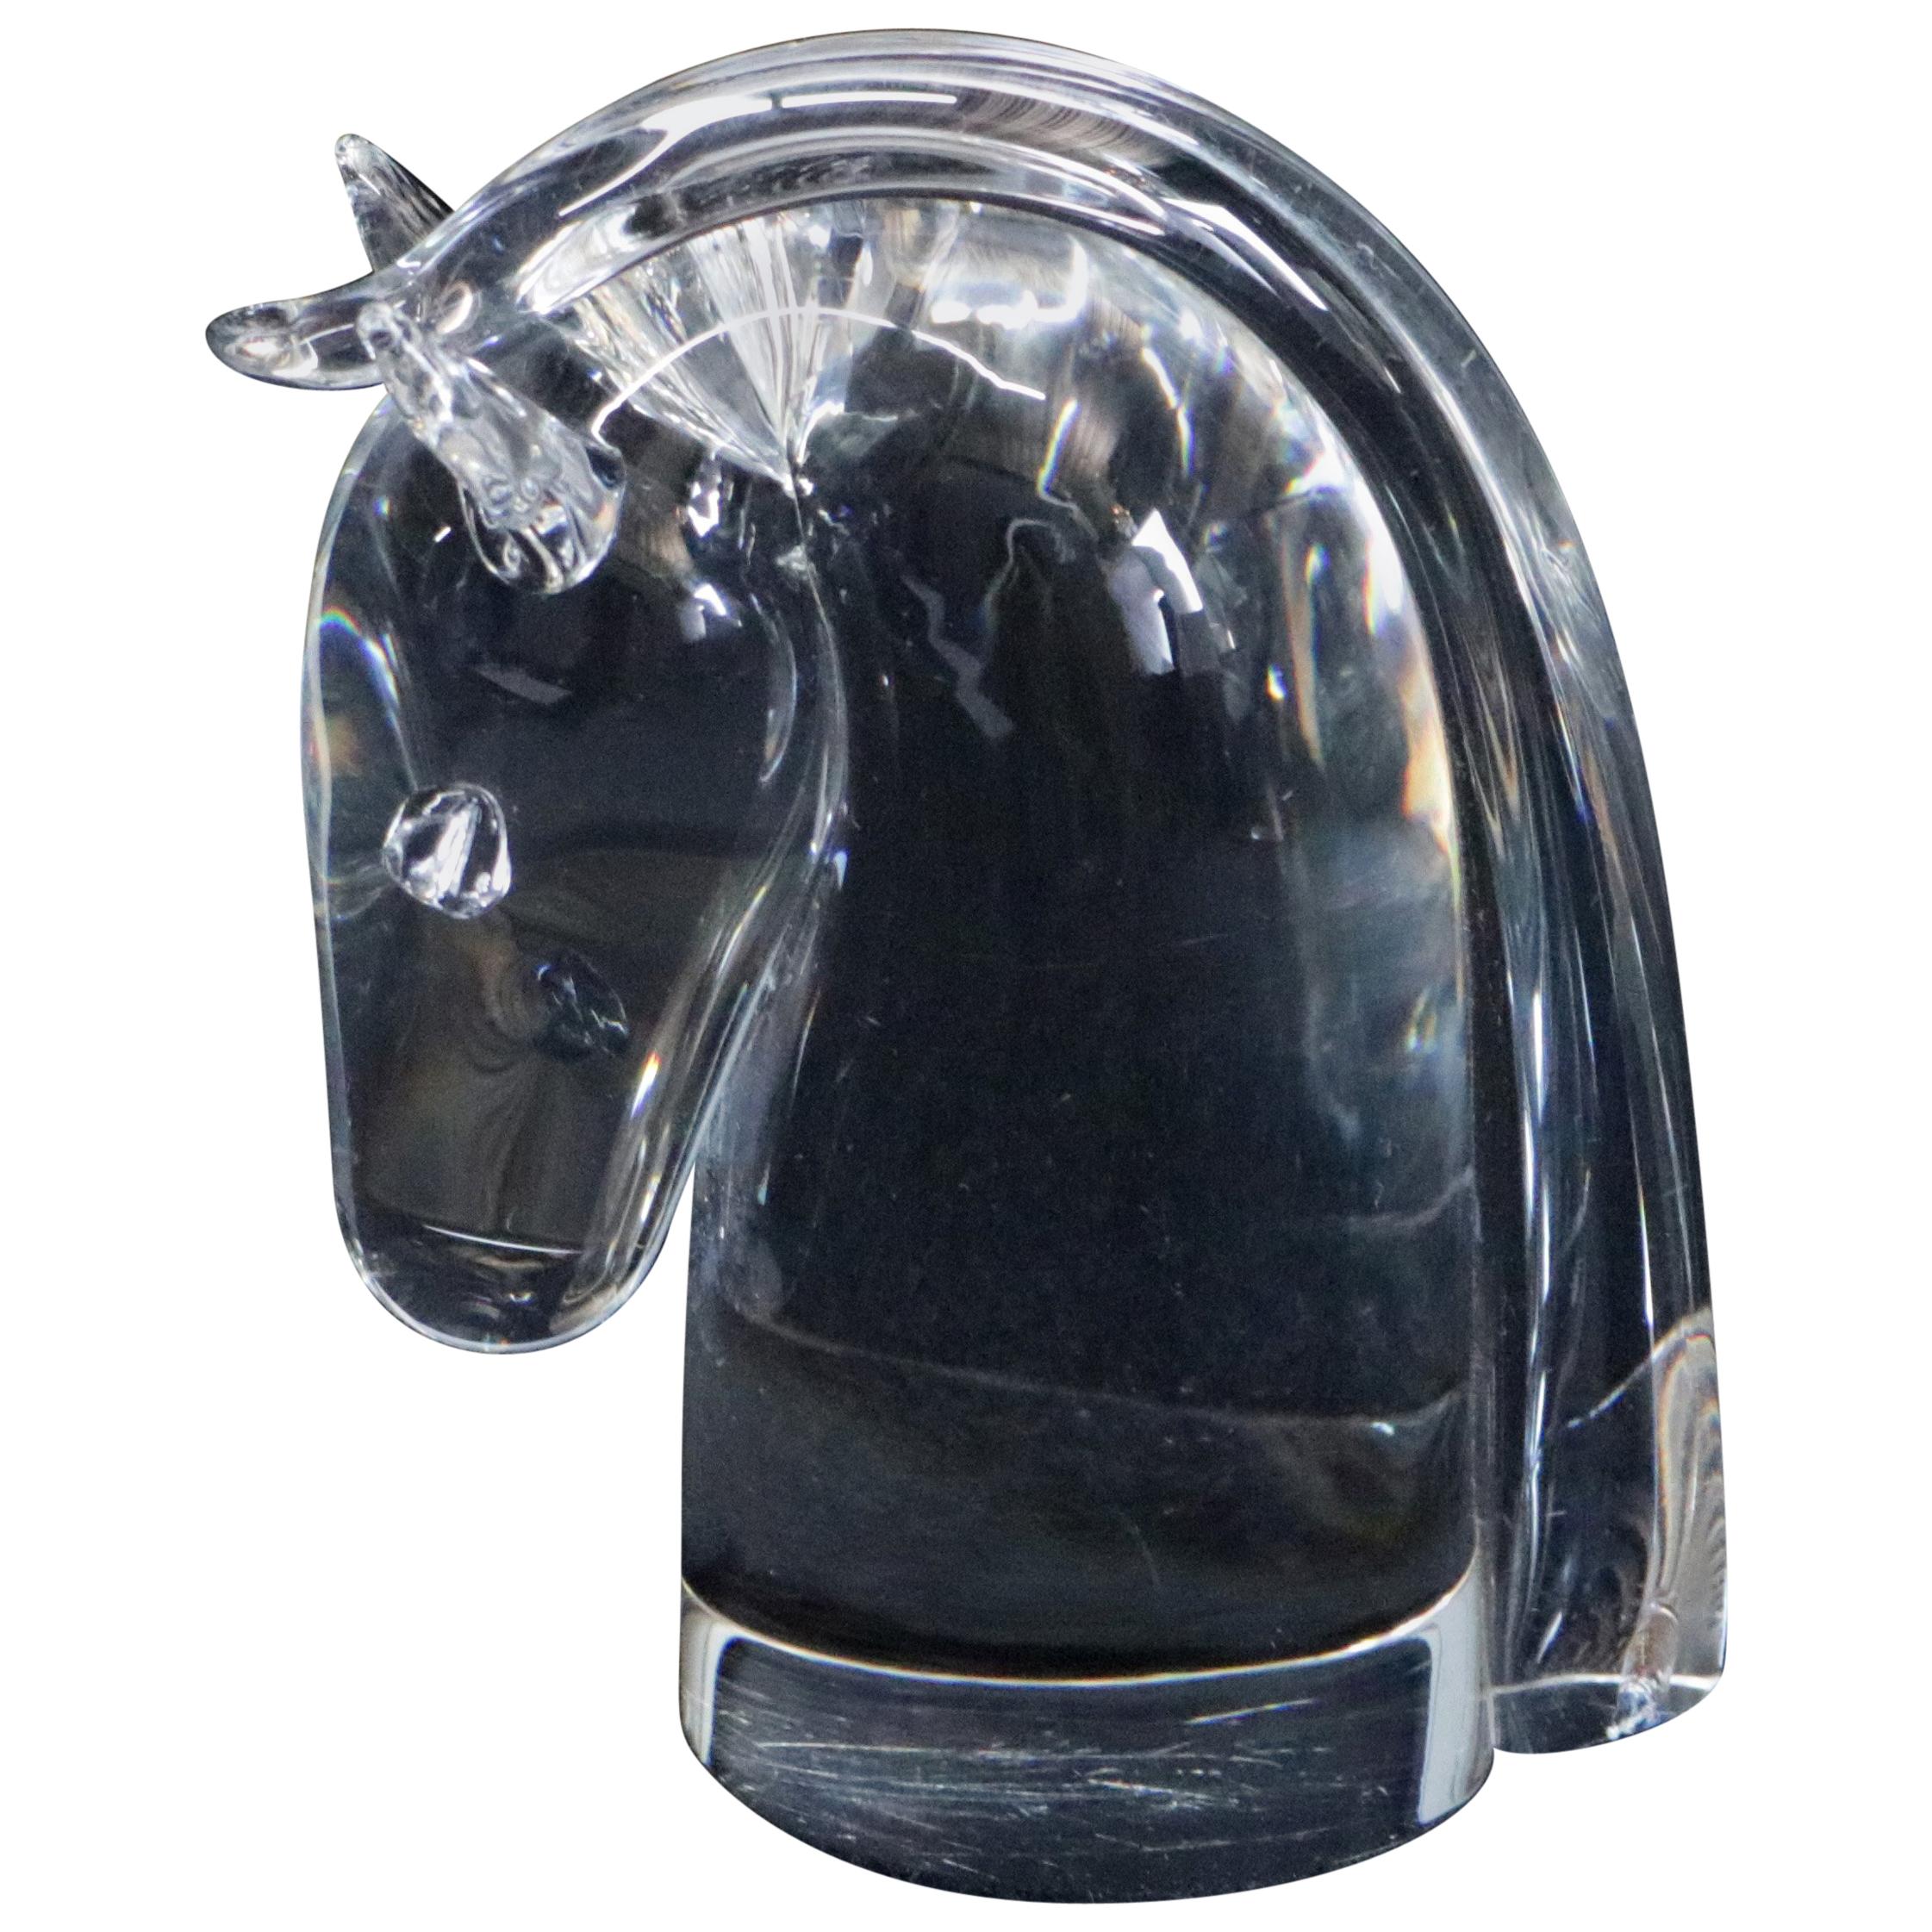 Steuben Figurative Crystal Sculpture Horse Head Paperweight by Dowler, Signed